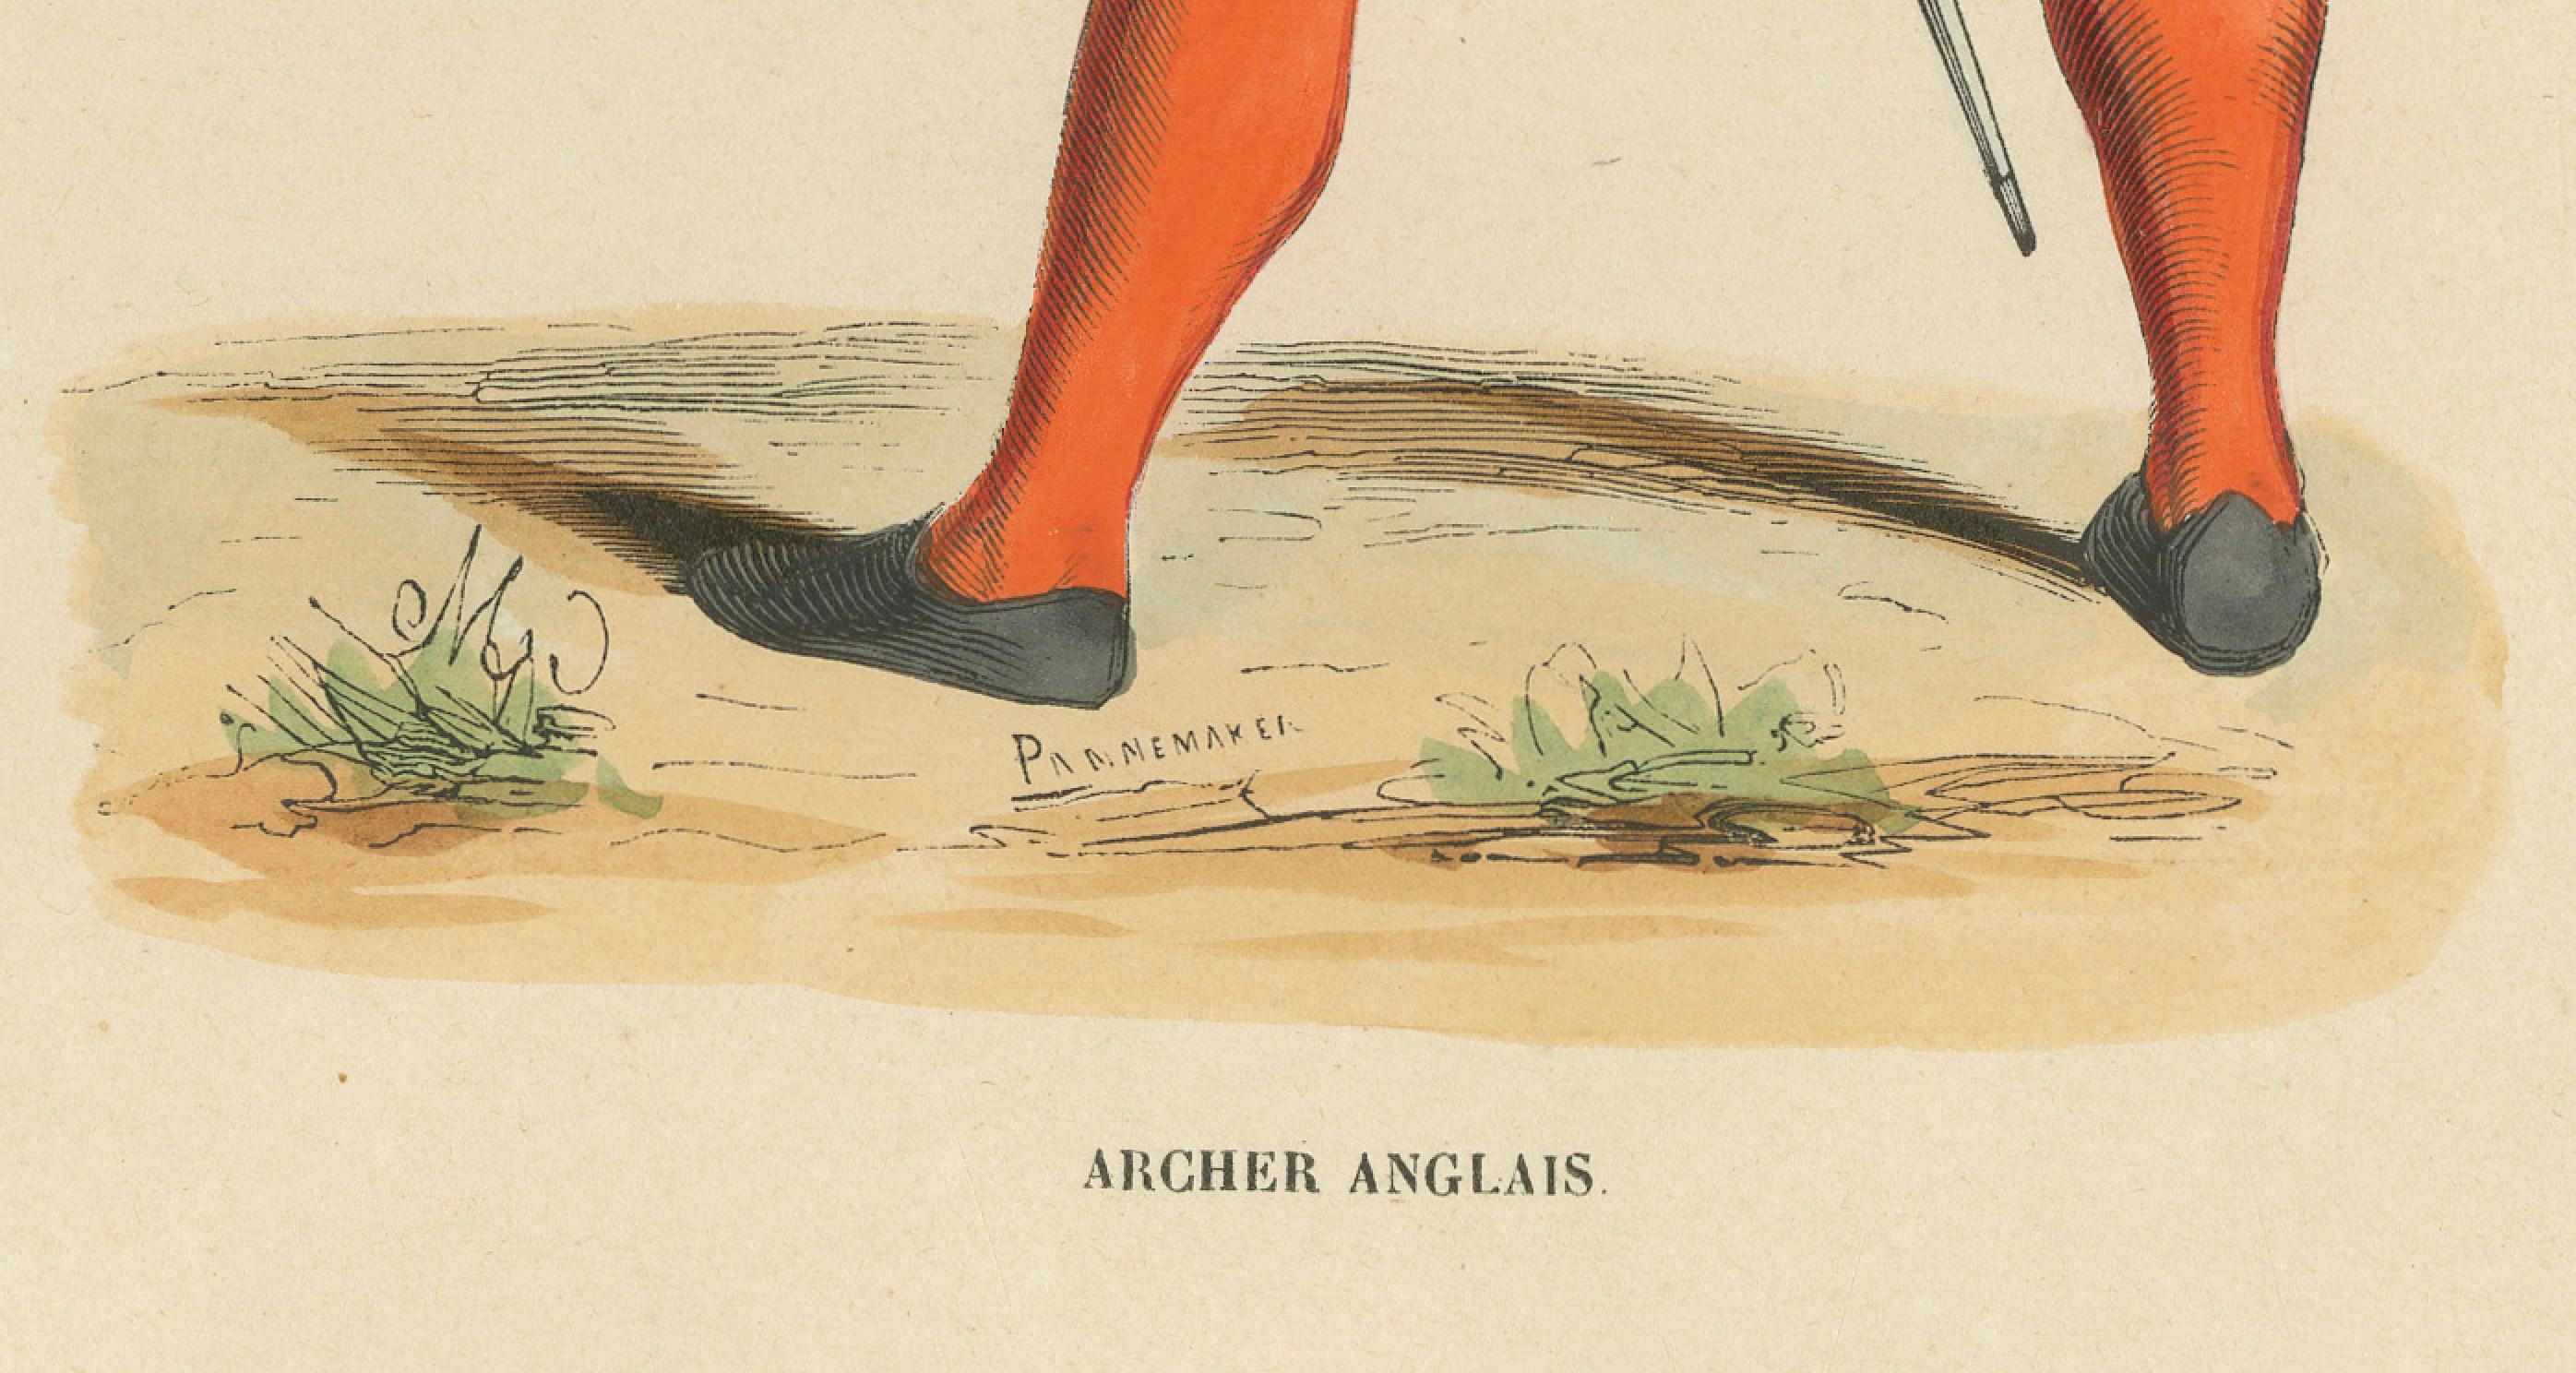 This original antique print depicts an English archer in the act of drawing his longbow, a weapon for which English soldiers were famous during the medieval period. He's dressed in a red garment with a detailed breastplate, and a sword at his side.